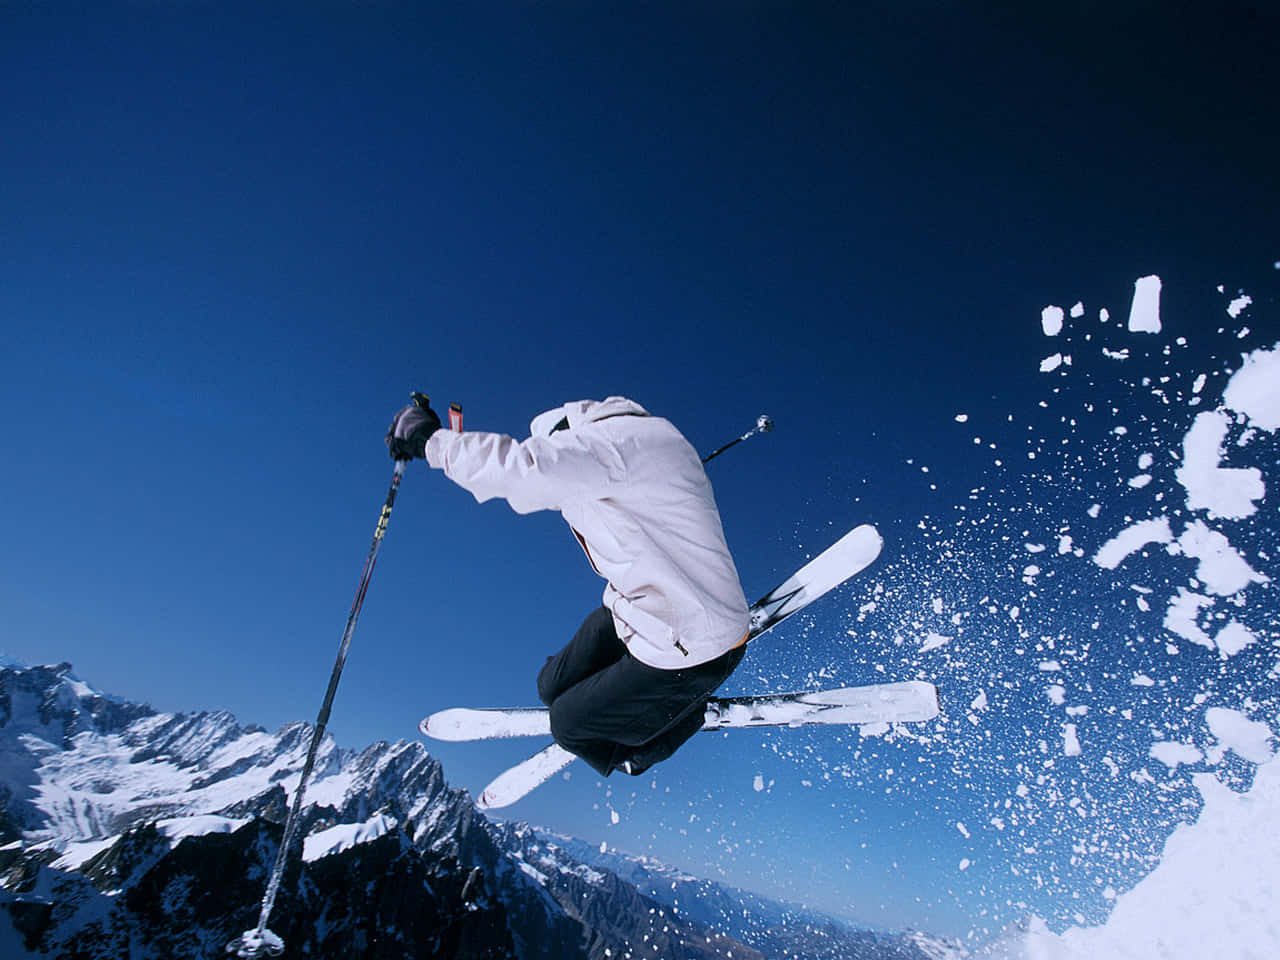 "Hit the slopes and make the most of winter"!